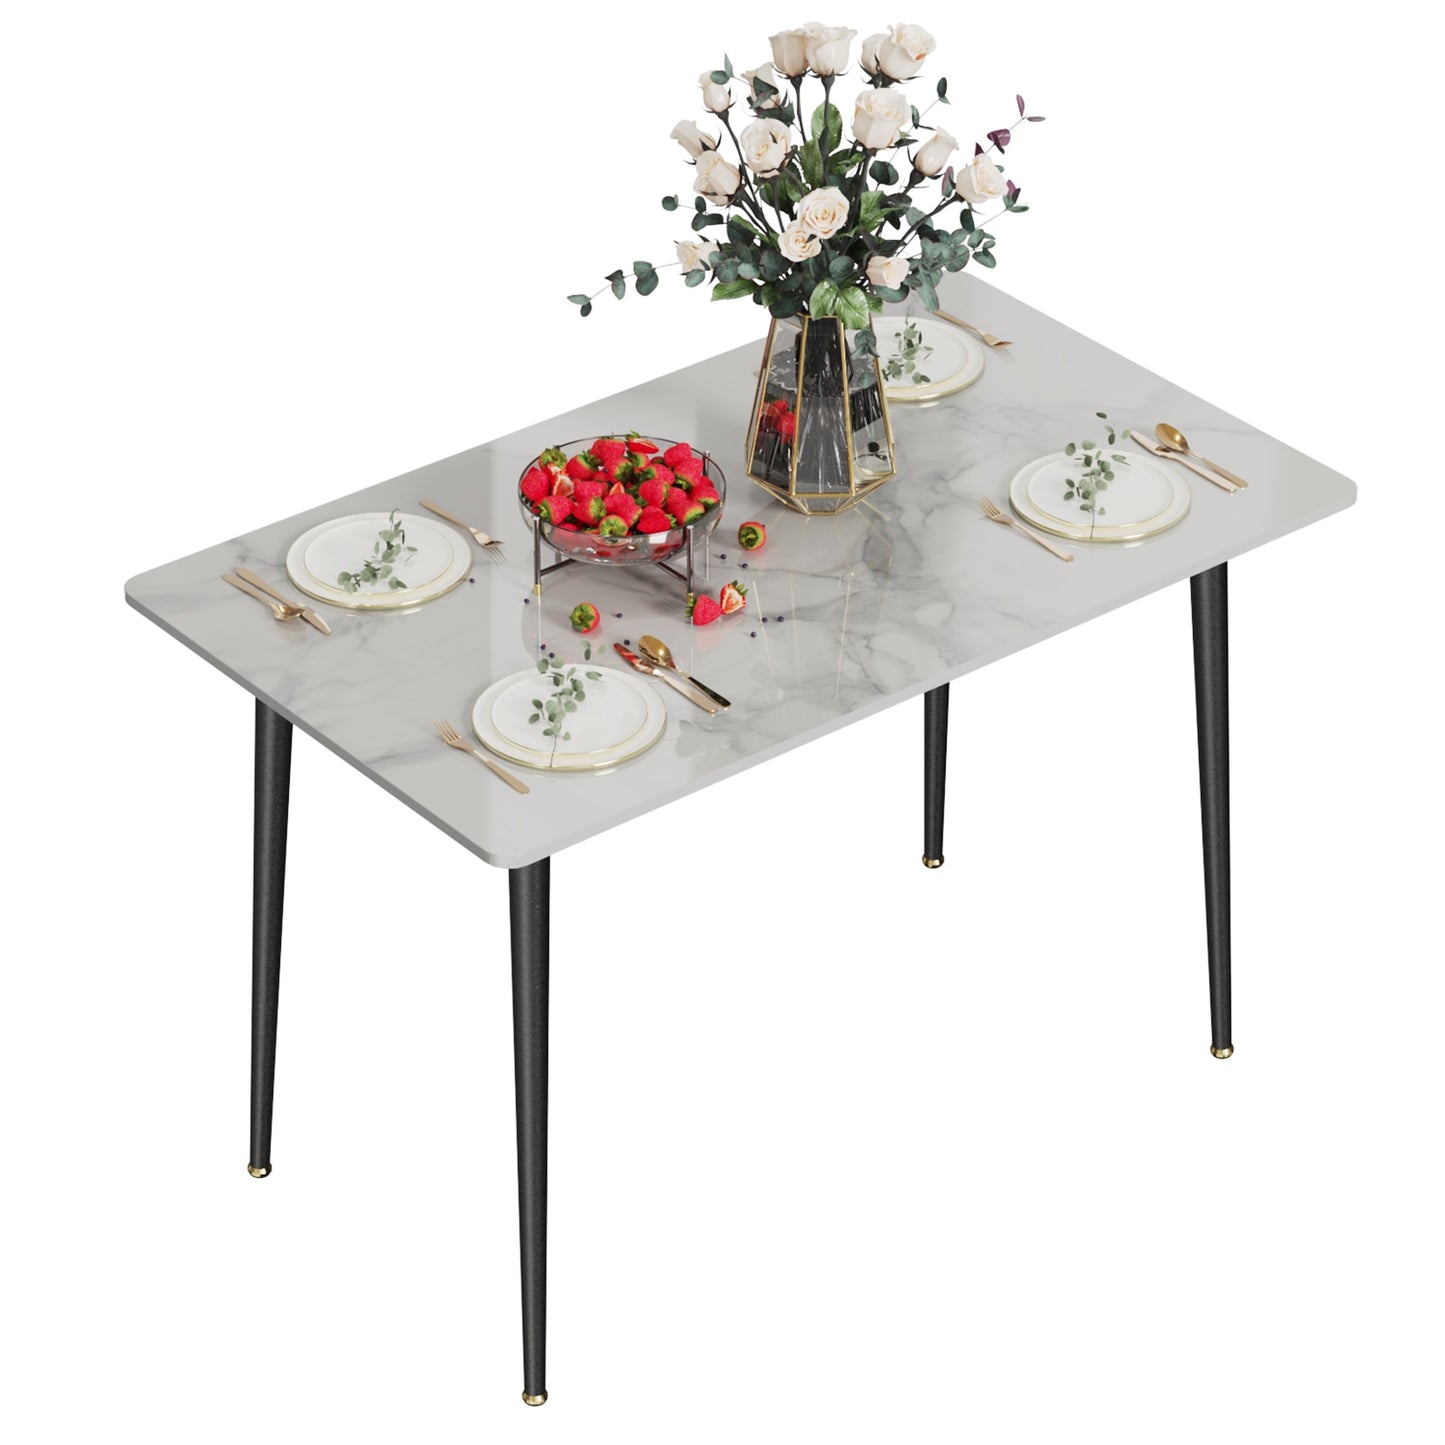 Kitchen Table Rectangle Dining Table - Modern Dining Room Table